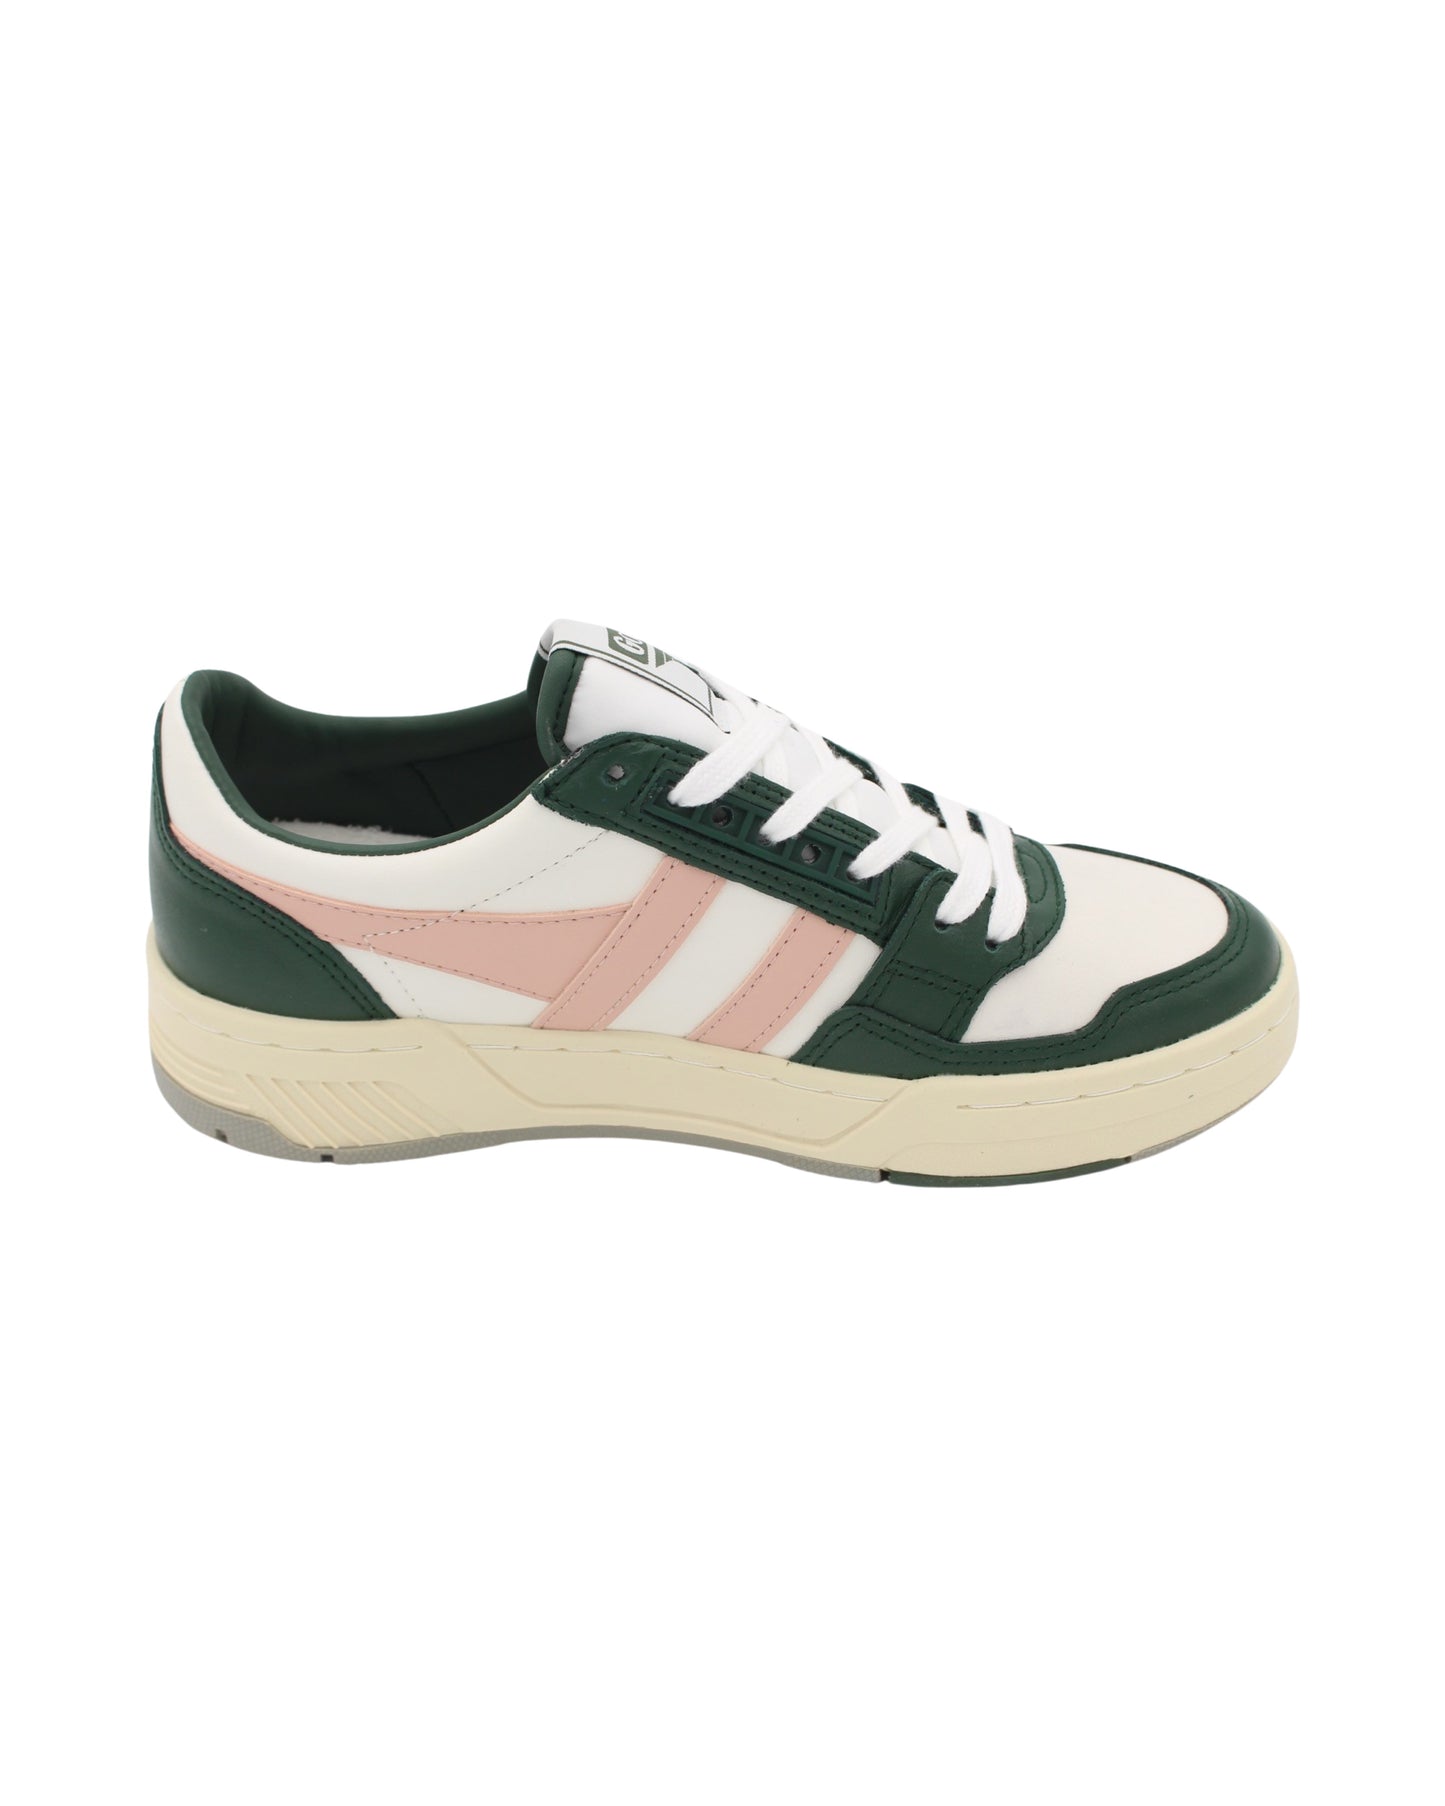 Gola - Ladies Shoes Trainers White, Evergreen, Pearl (2261)